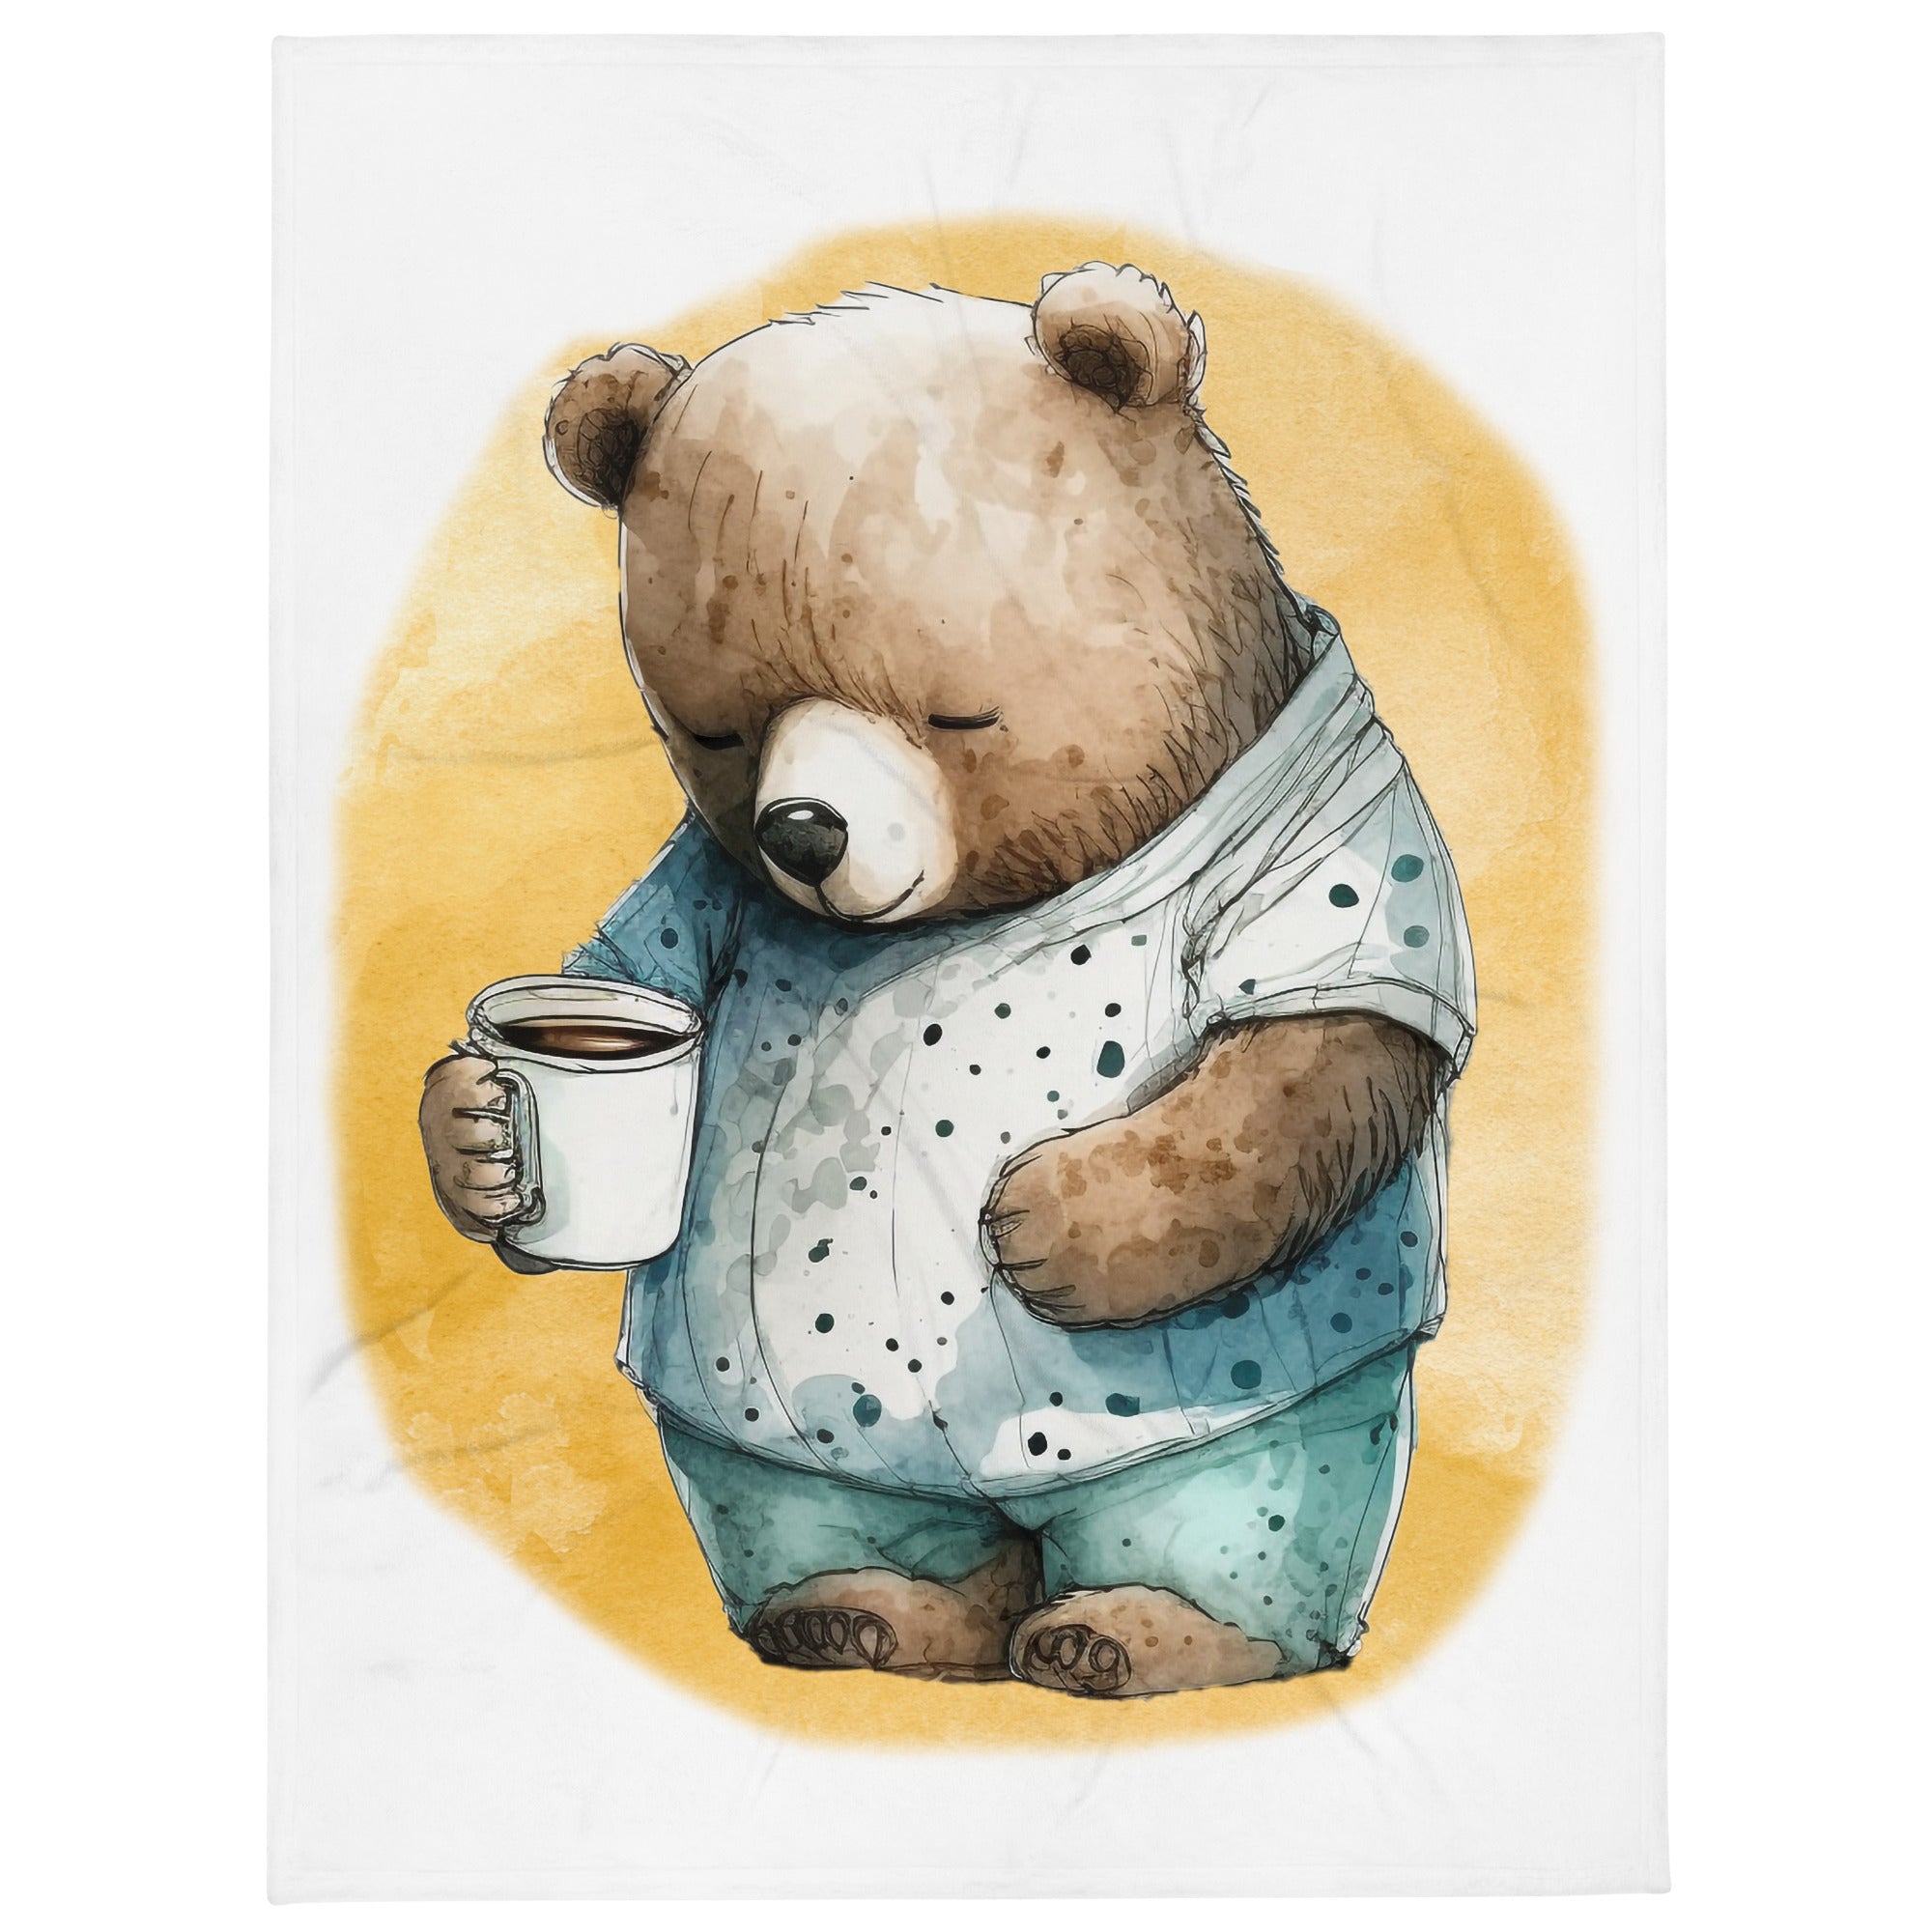 Sleepy Bear 100% Polyester Soft Silk Touch Fabric Throw Blanket - Cozy, Durable and Adorable